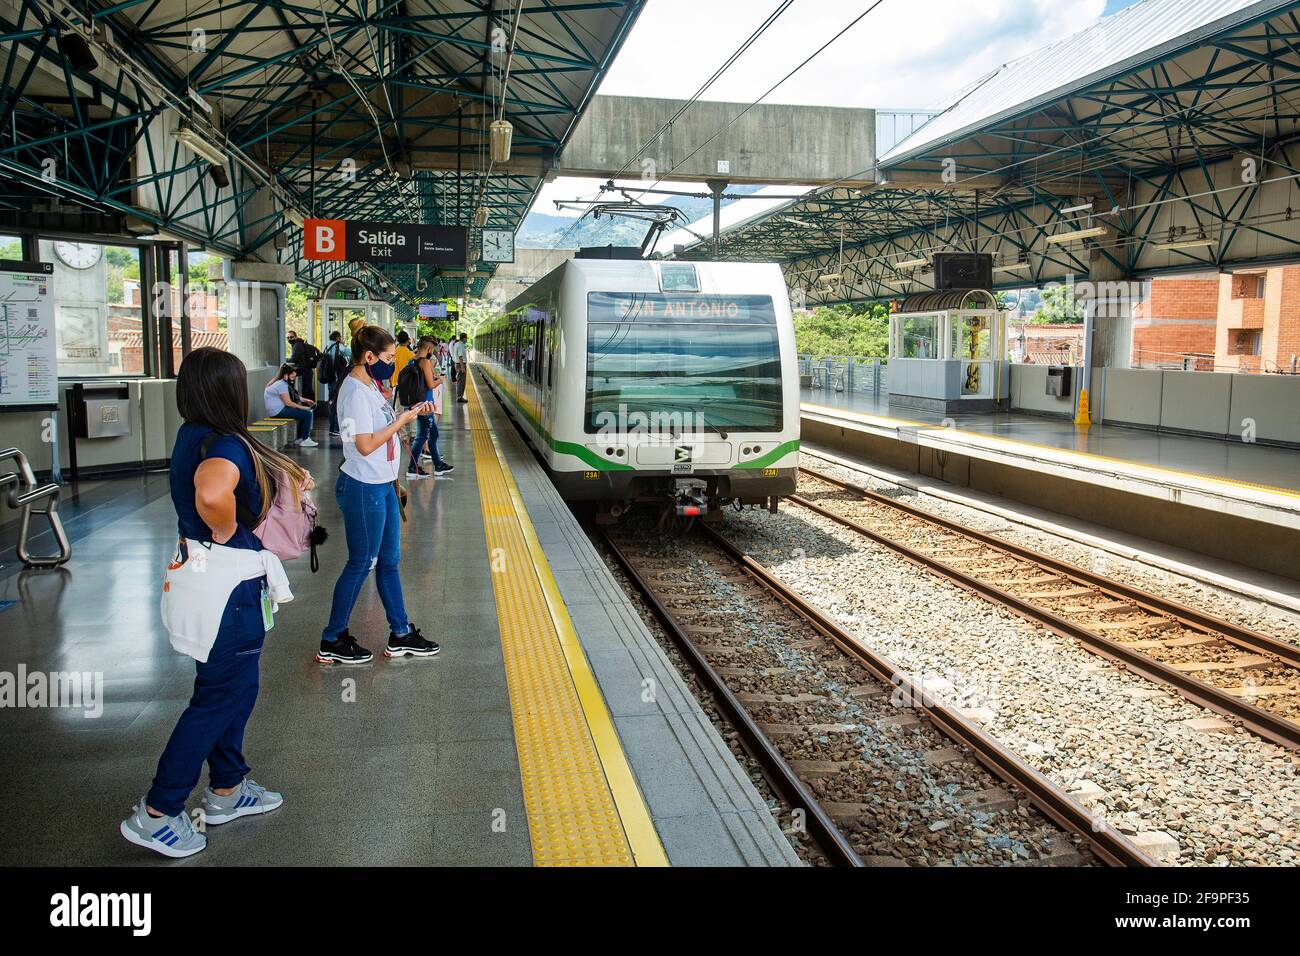 Medellin, Antioquia. Colombia - February 25, 2017. Metro-type mass transportation system that directly serves the city and its surrounding municipalit Stock Photo